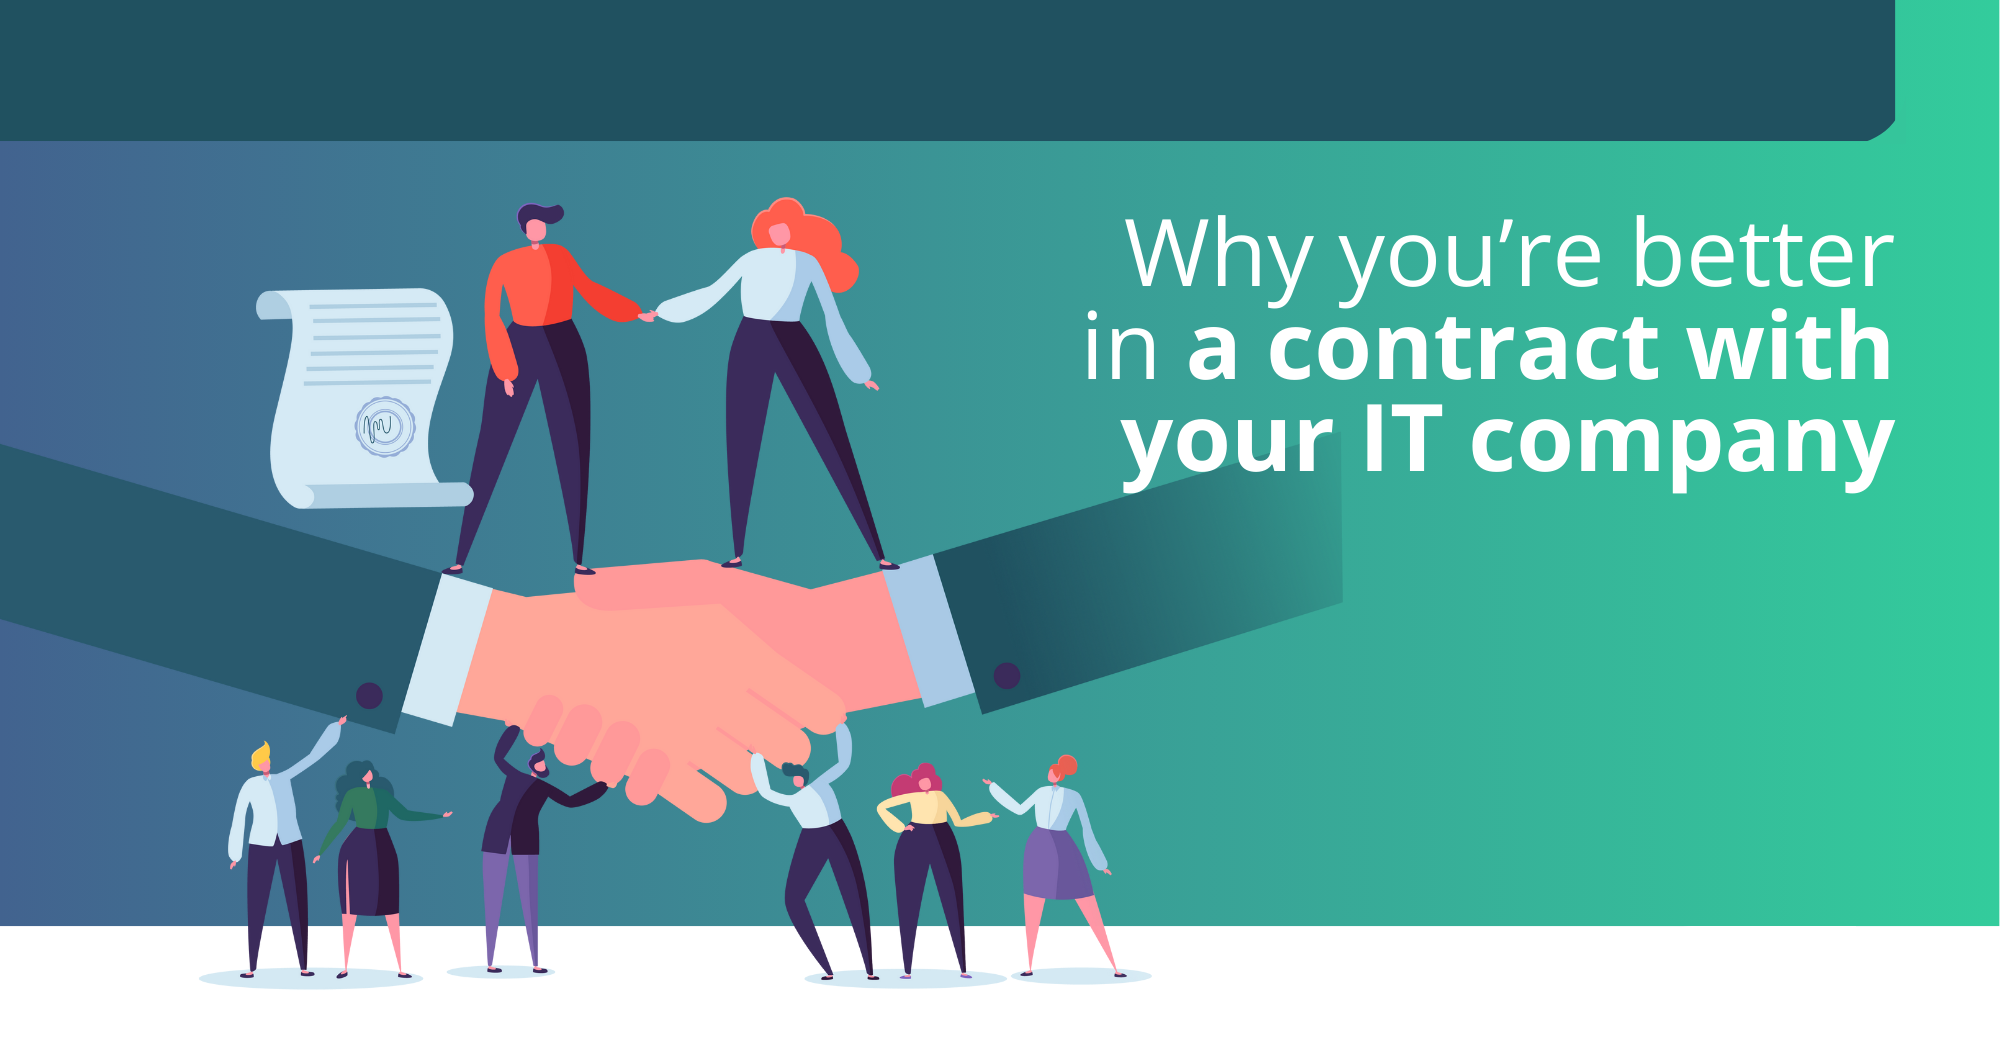 Why you’re better off in a contract with your IT company